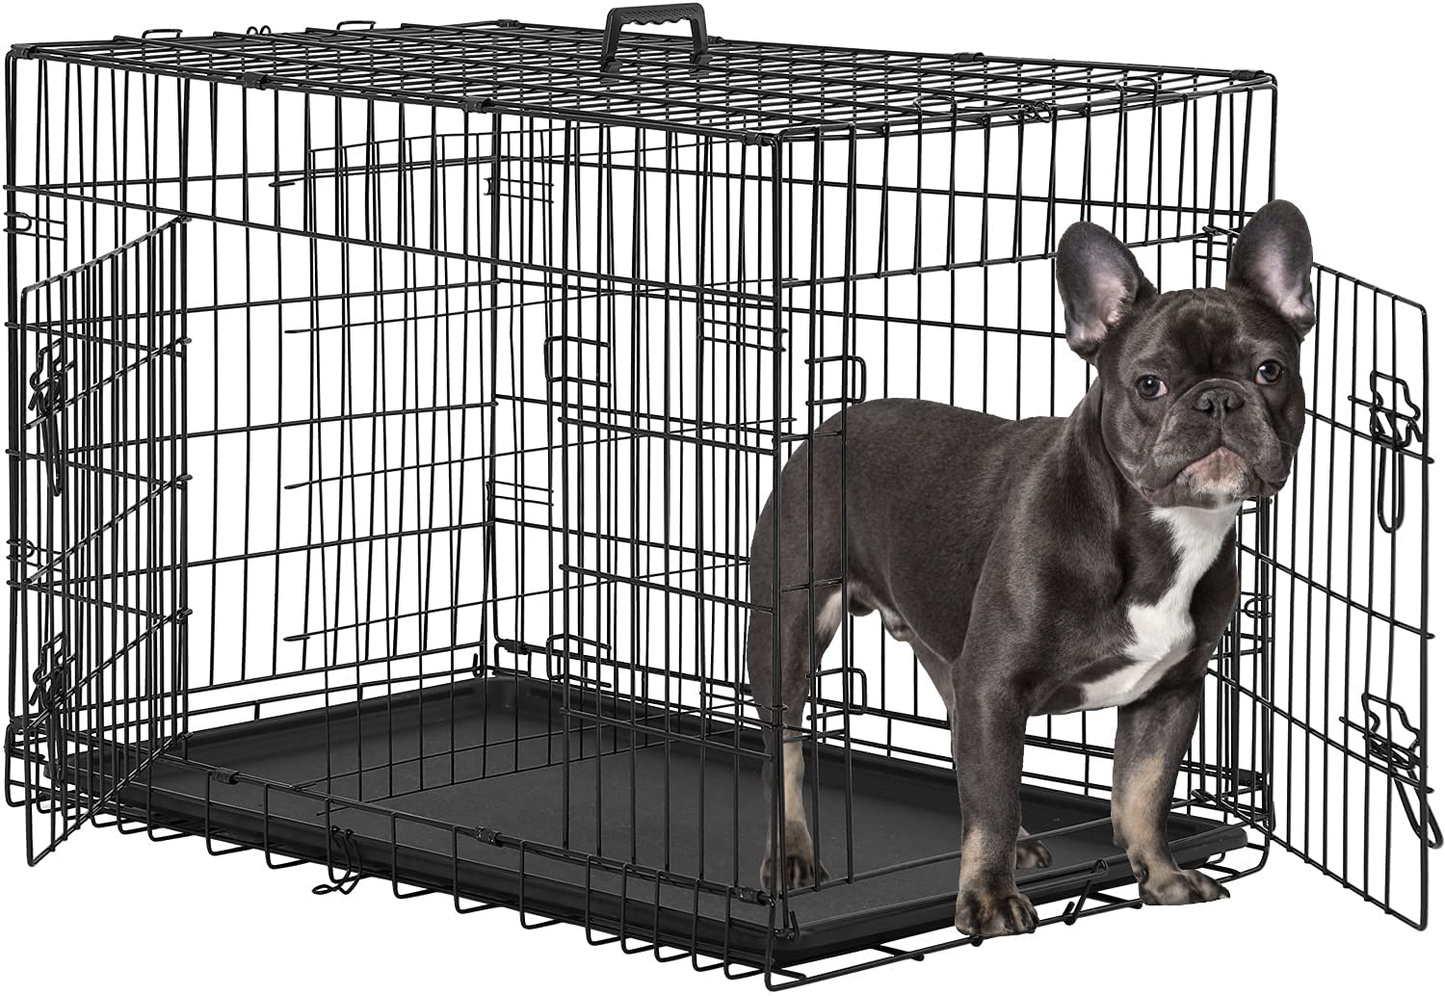 Bestpet 24,30,36,42,48 Inch Dog Crates for Large Dogs Folding Mental Wire Crates Dog Kennels Outdoor and Indoor Pet Dog Cage Crate with Double-Door,Divider Panel, Removable Tray and Handle Animals & Pet Supplies > Pet Supplies > Dog Supplies > Dog Kennels & Runs BestPet 30"  